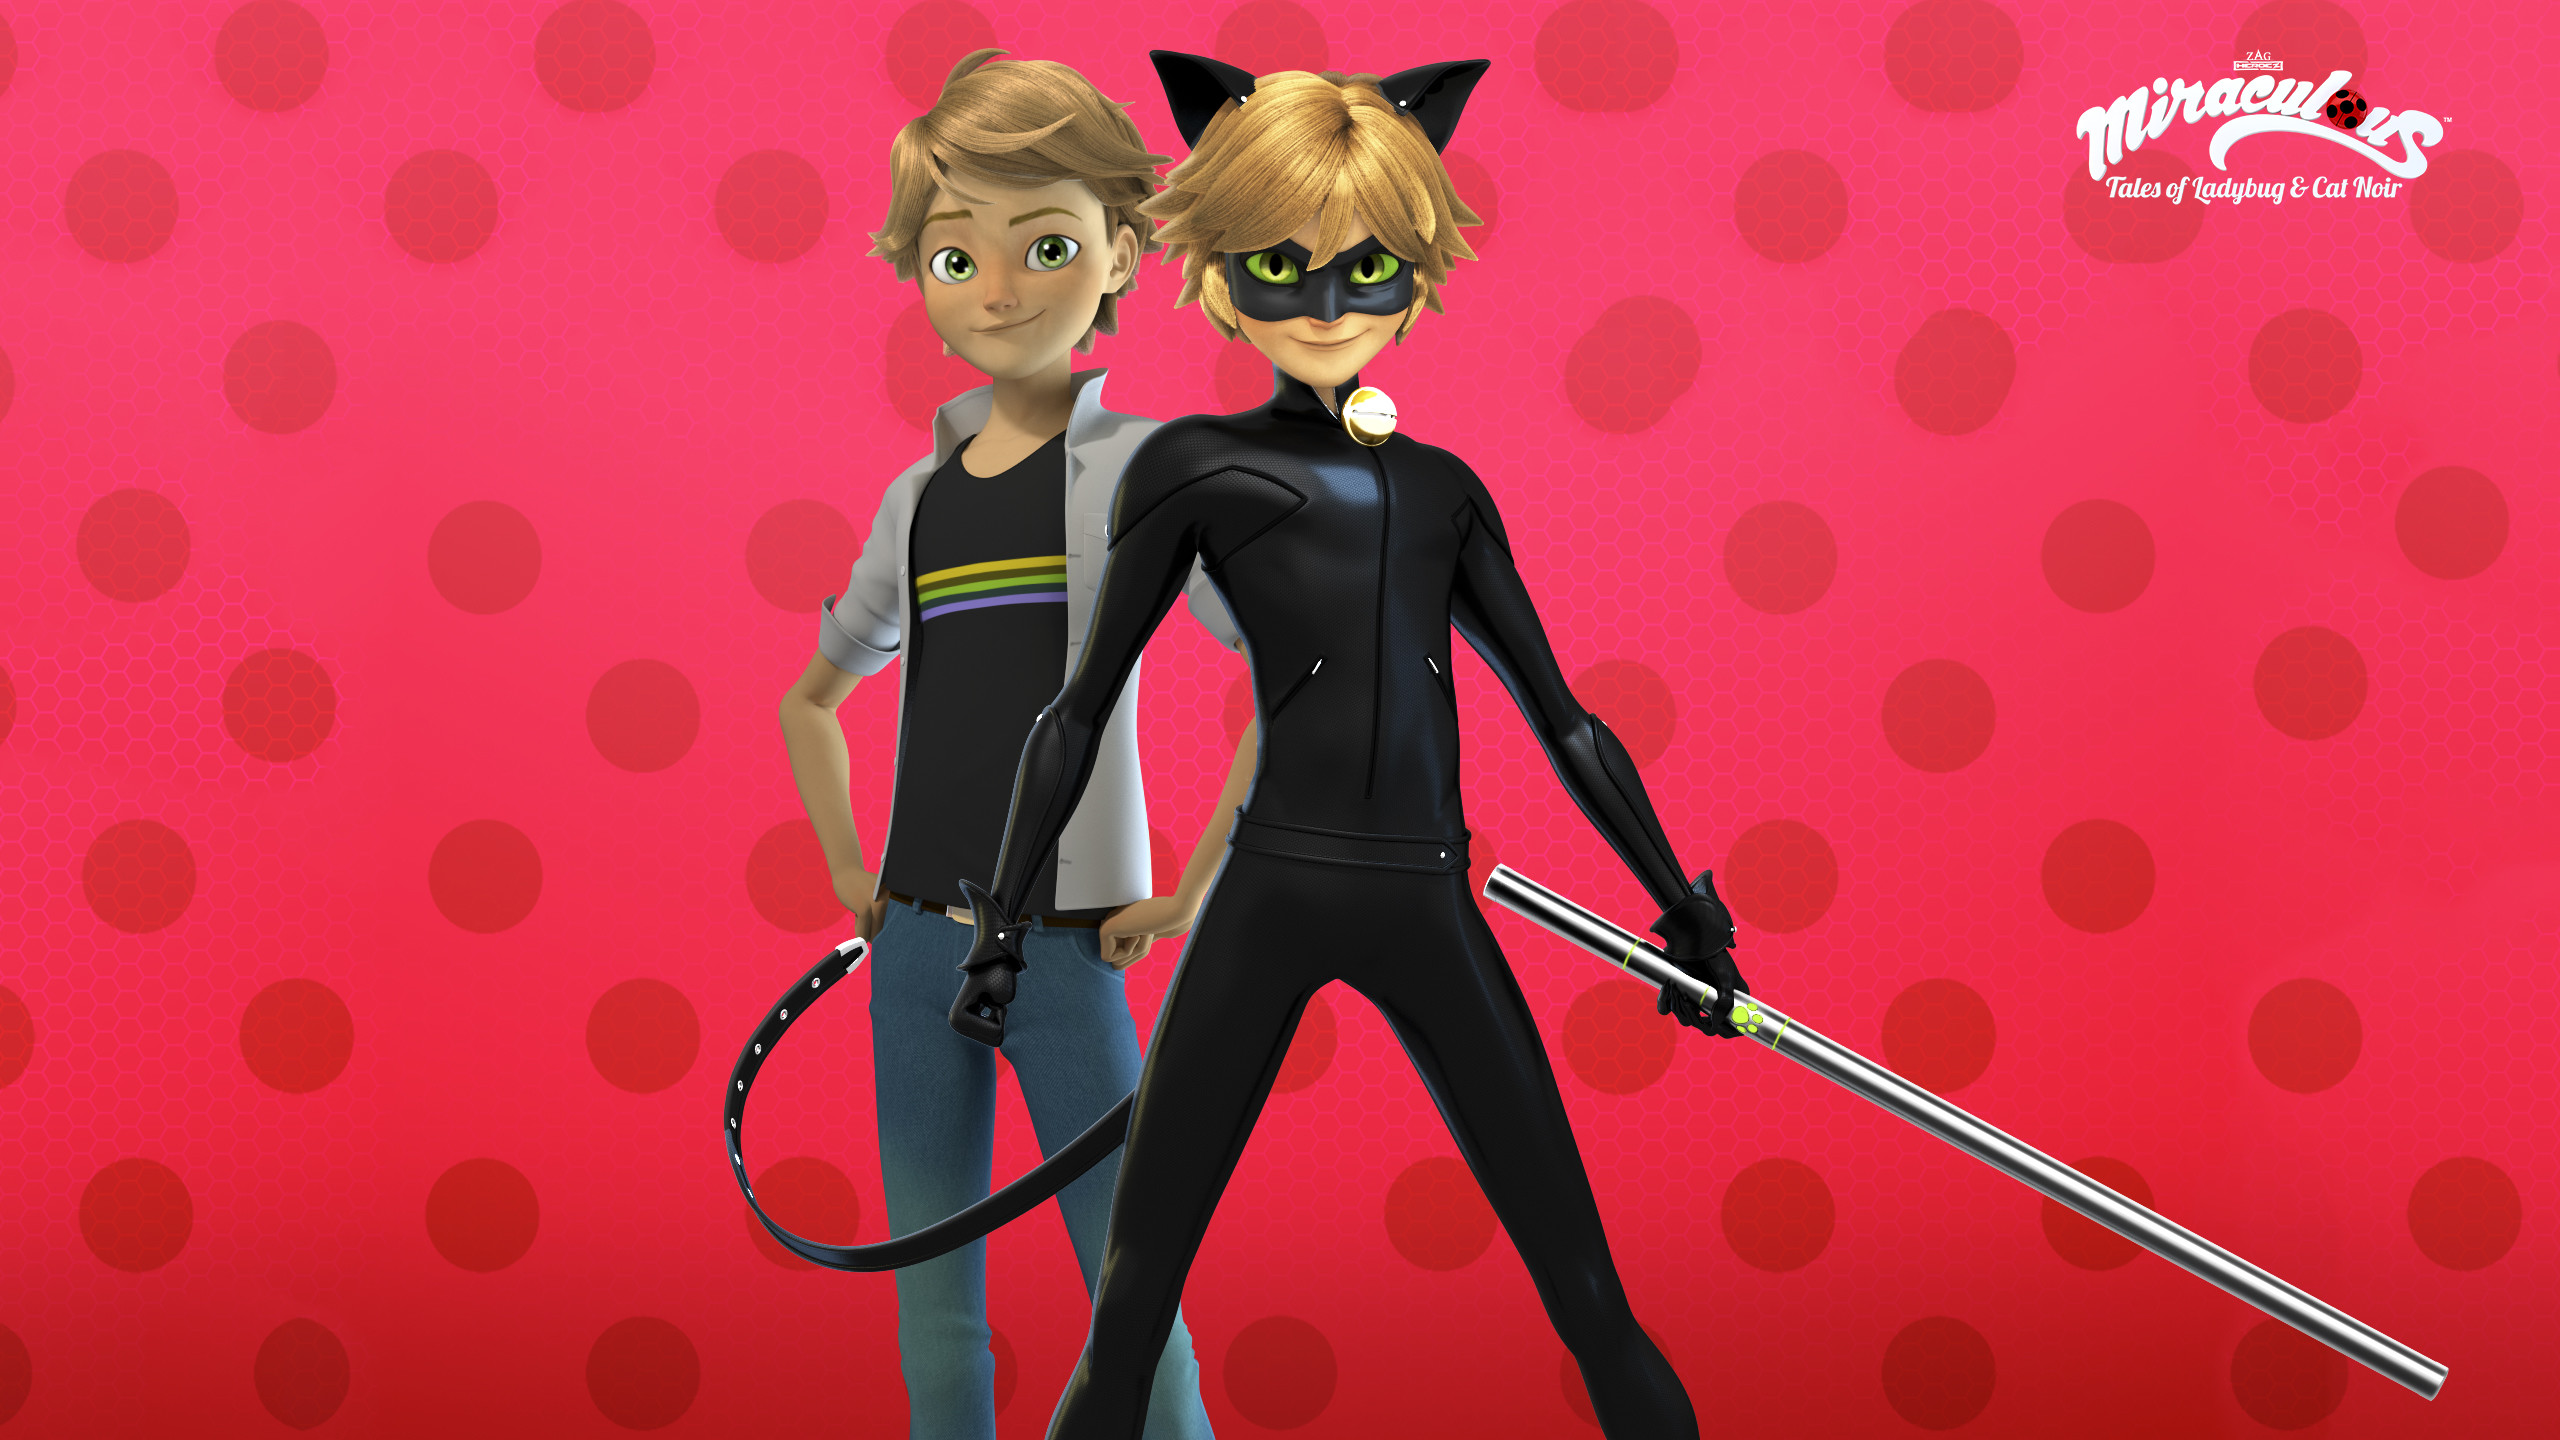 2560x1440 Miraculous Ladybug images Ladybug and Chat Noir wallpaper and .